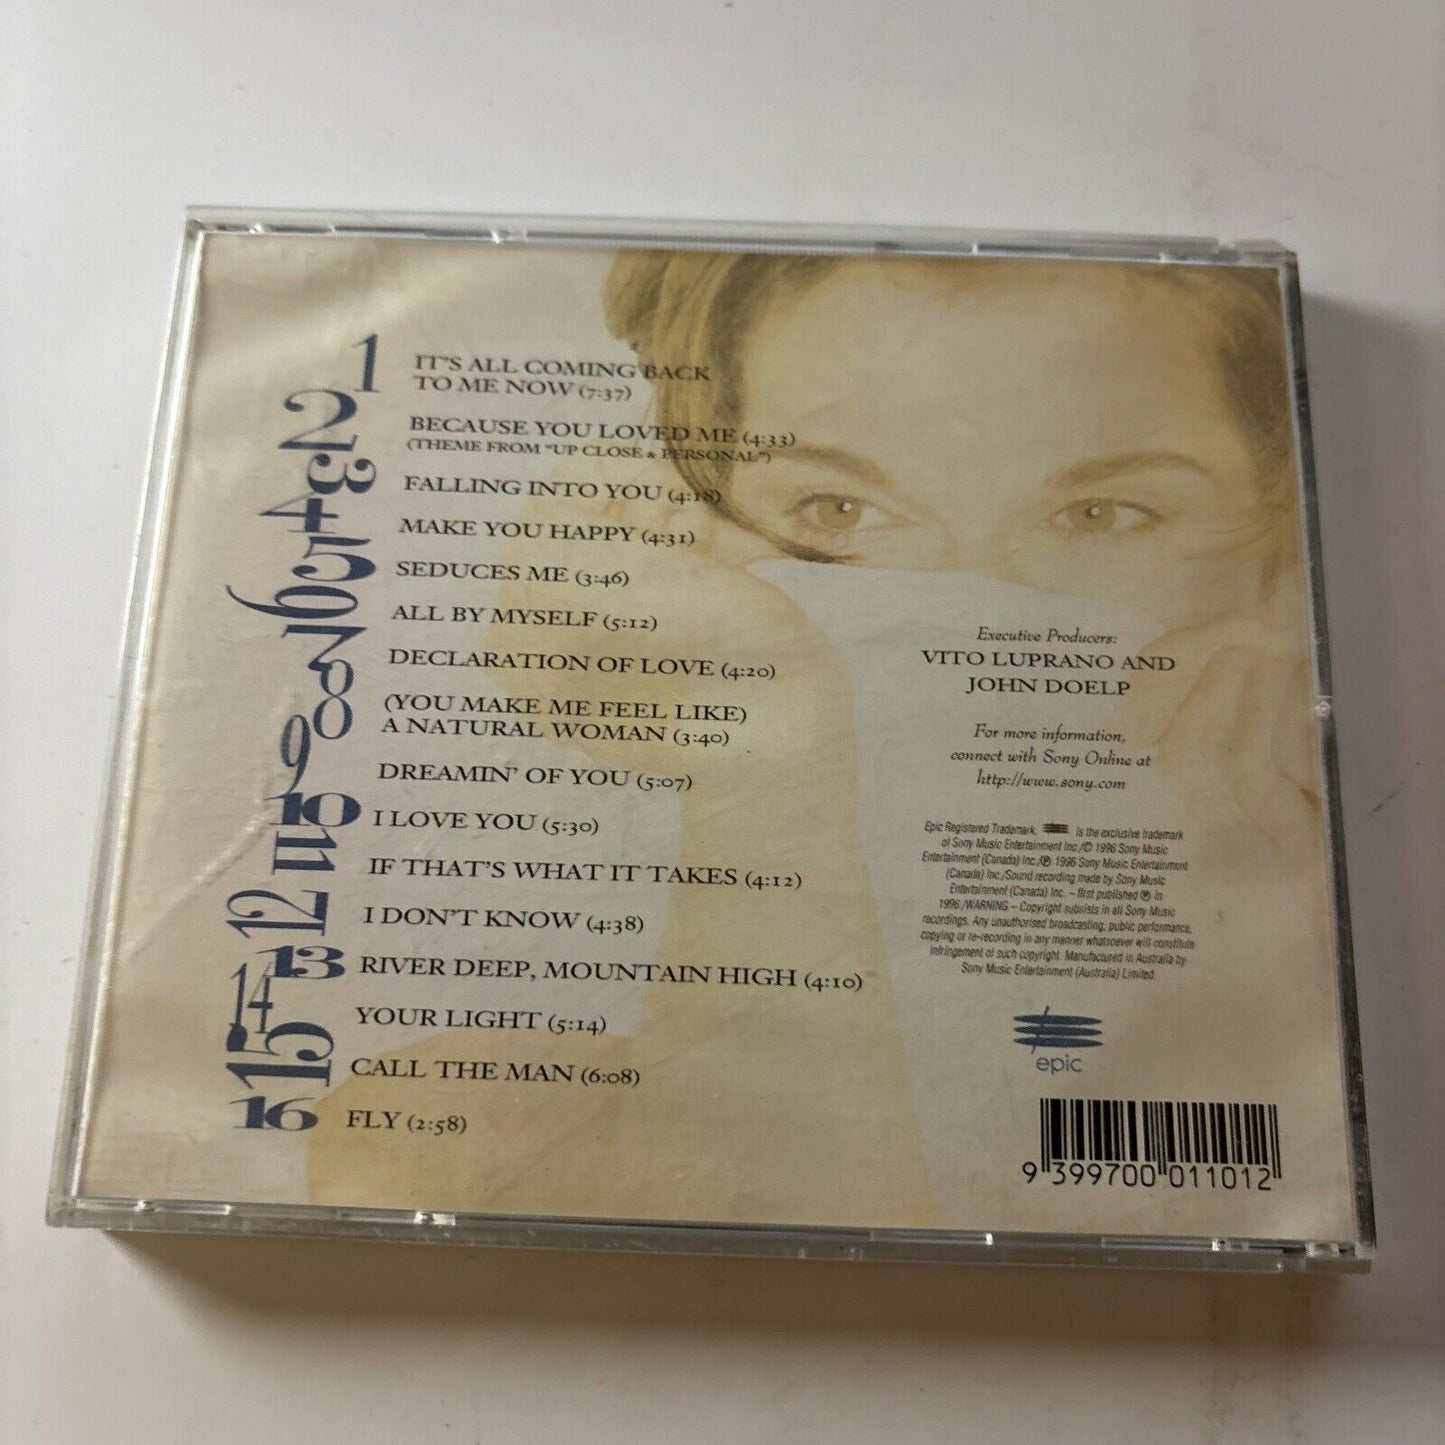 Celine Dion - Falling into You (CD, 1996)